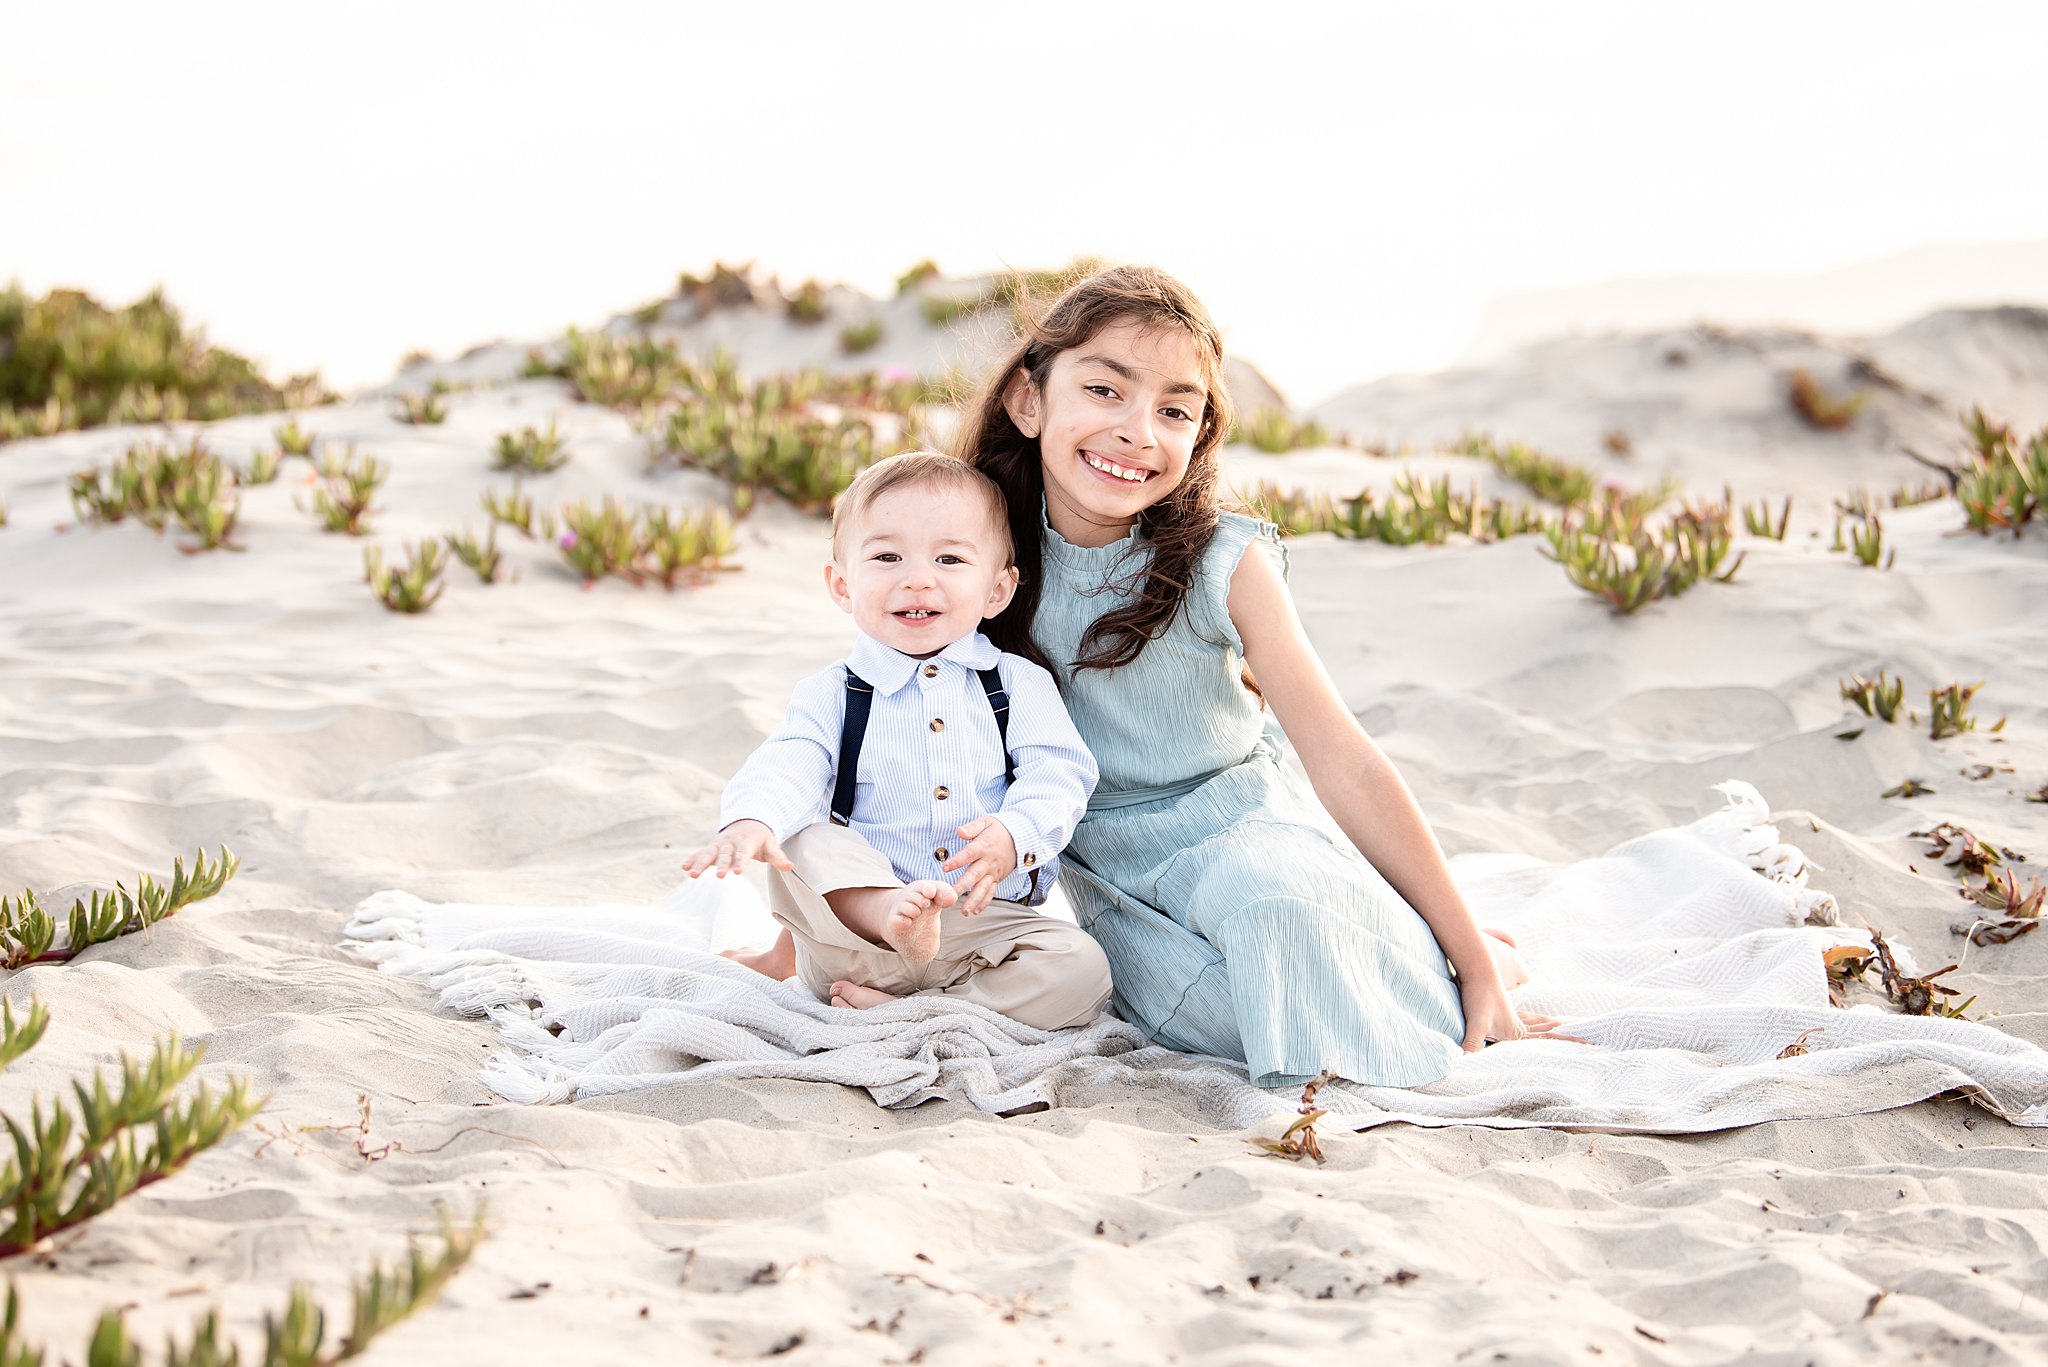 A young girl in a blue dress sits on a beach on a blanket smiling with her toddler little brother after attanding san diego preschools